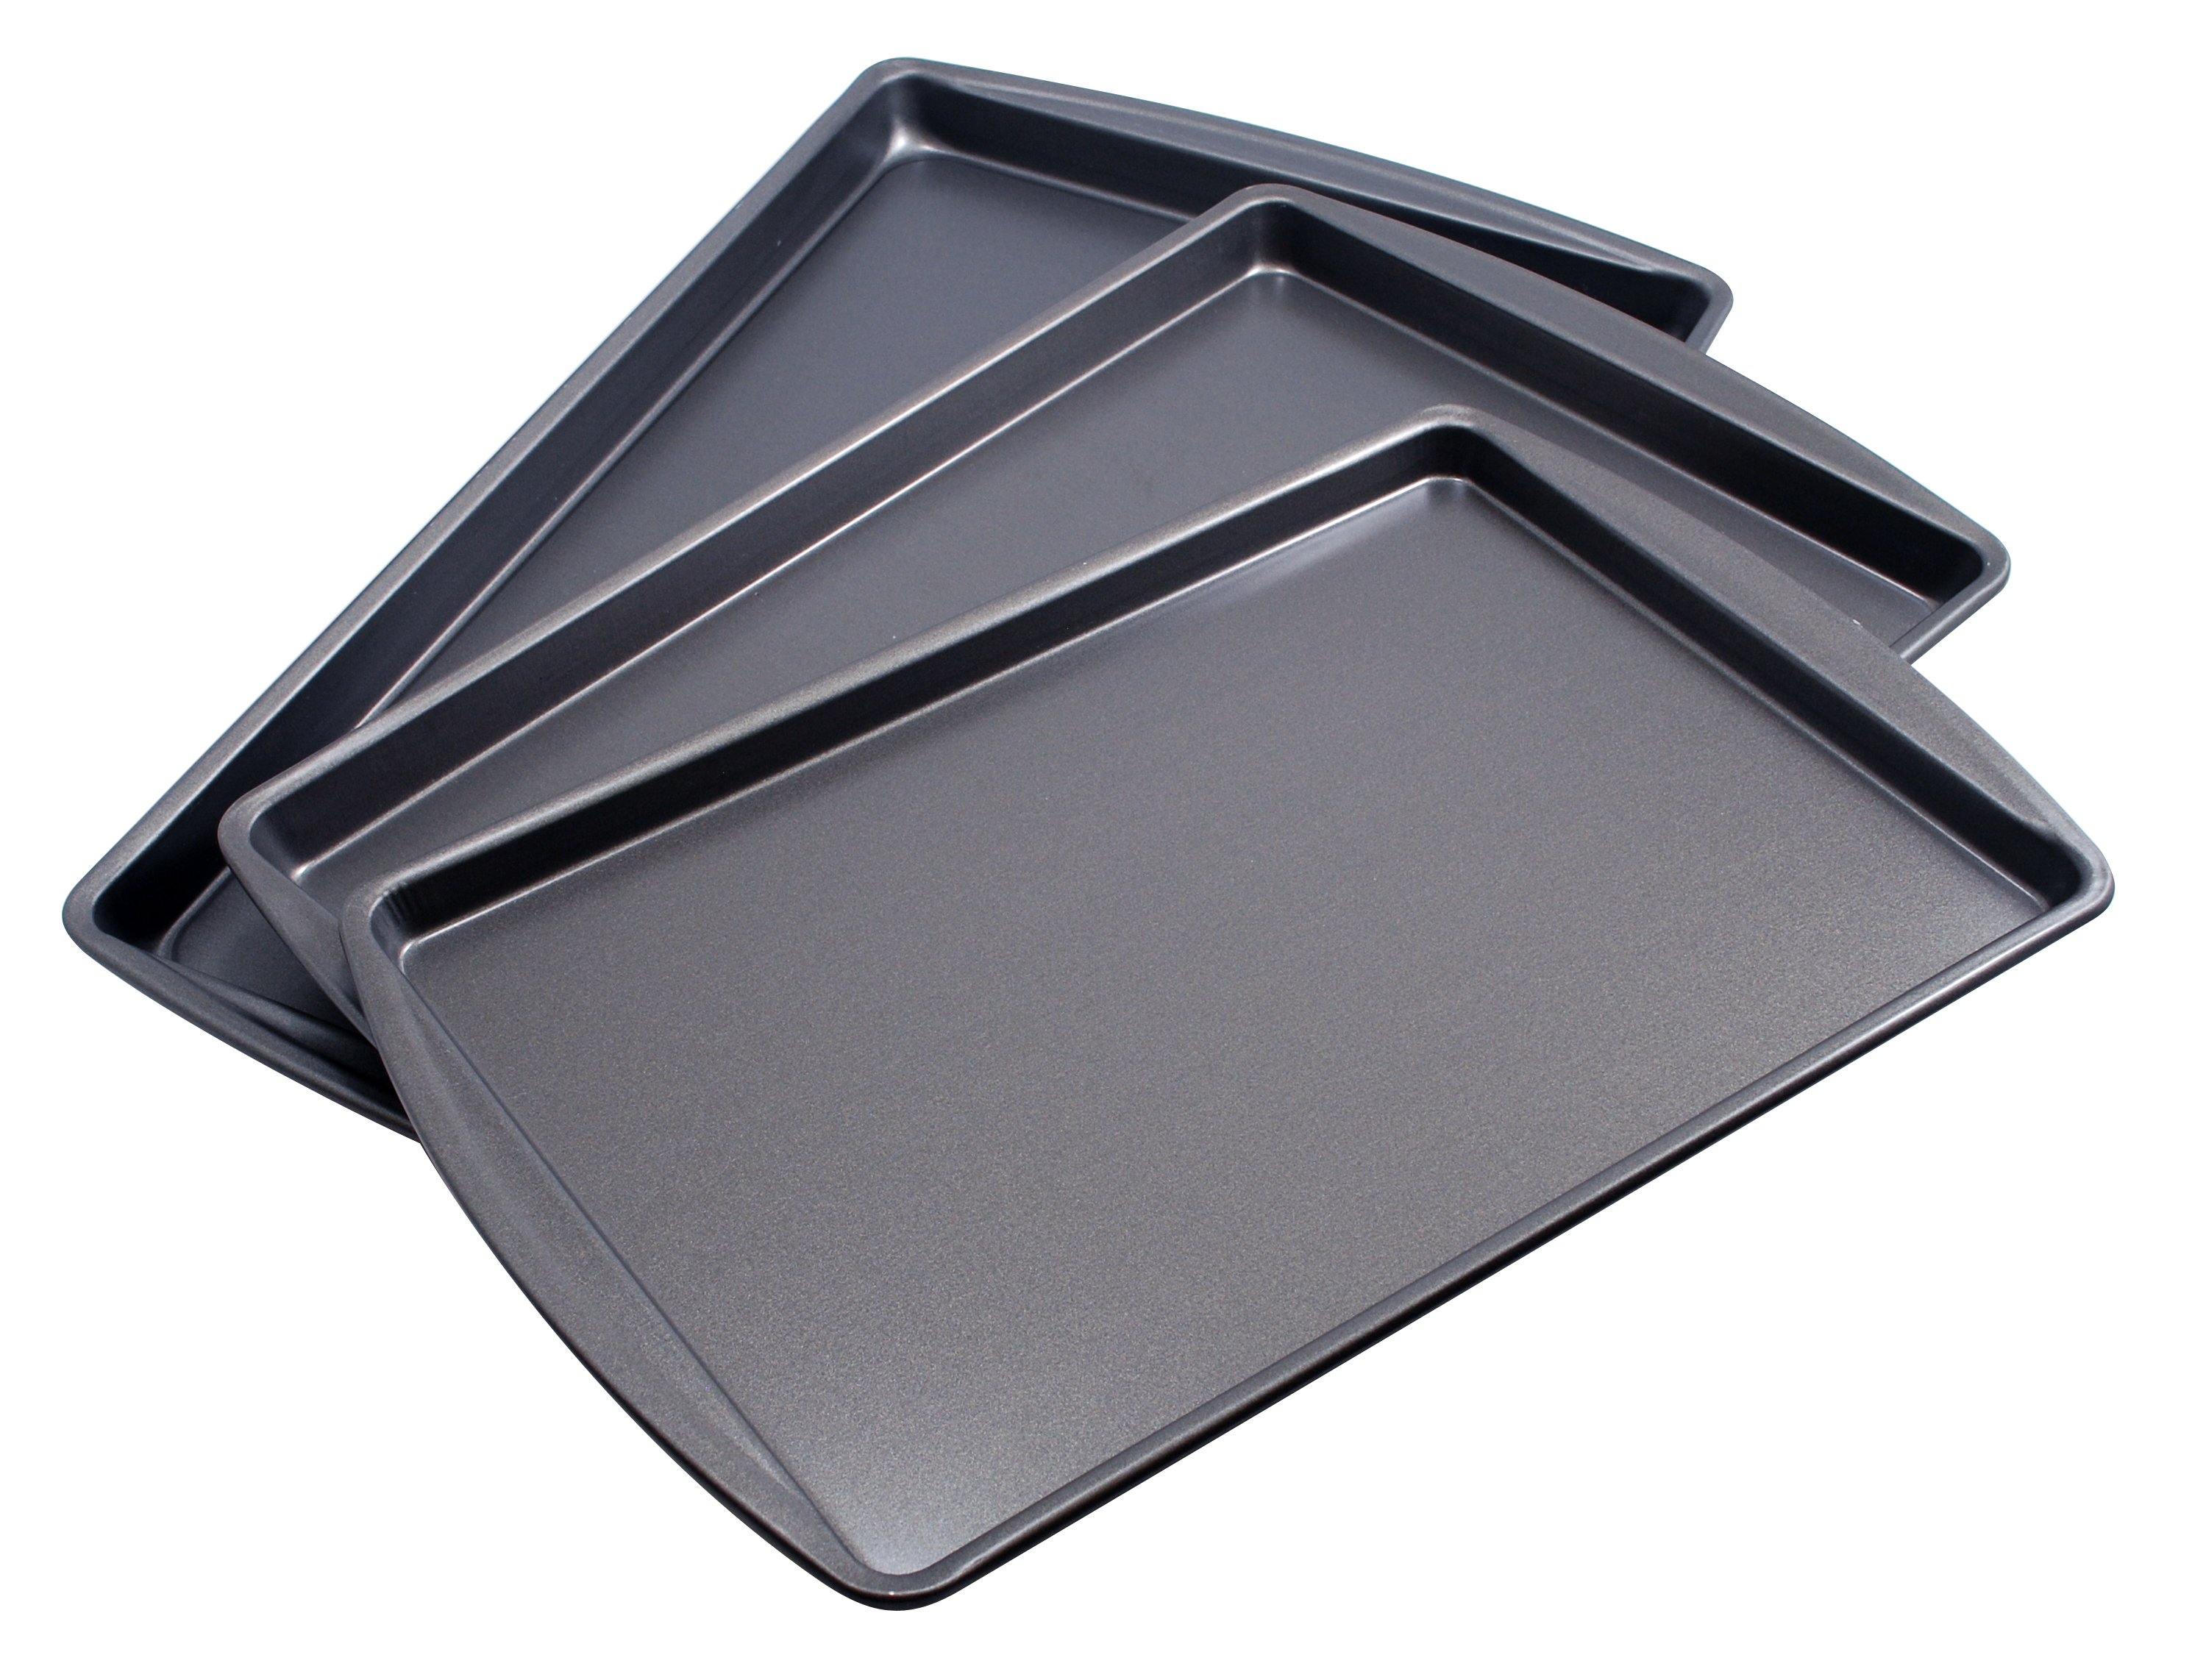 Mainstays Nonstick Cookie Sheet Set, 3 Piece Small, Medium and Large Cookie Sheet, Baking Sheet, Gray - image 2 of 6